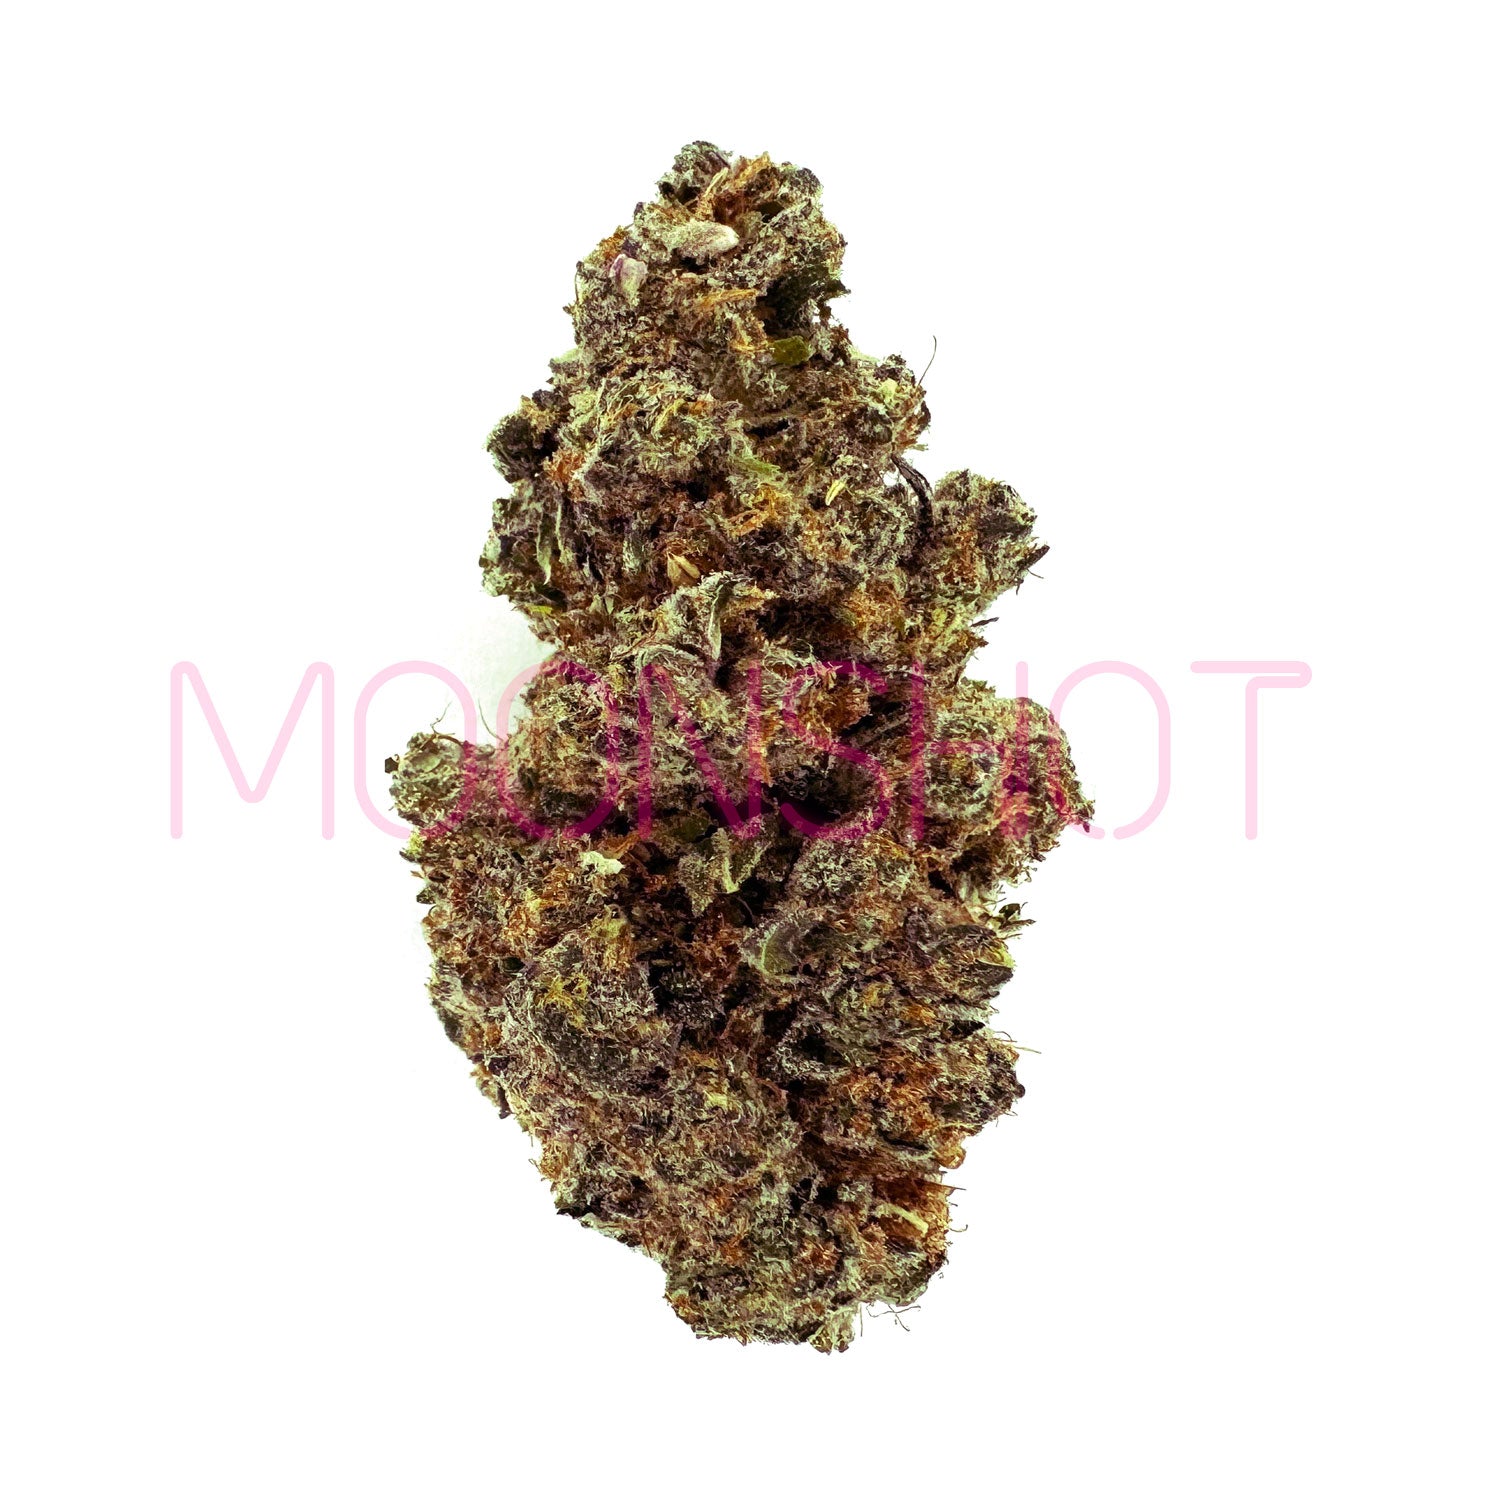 A nug of cannabis flower from the Peaches & Cream strain sits against a white background.